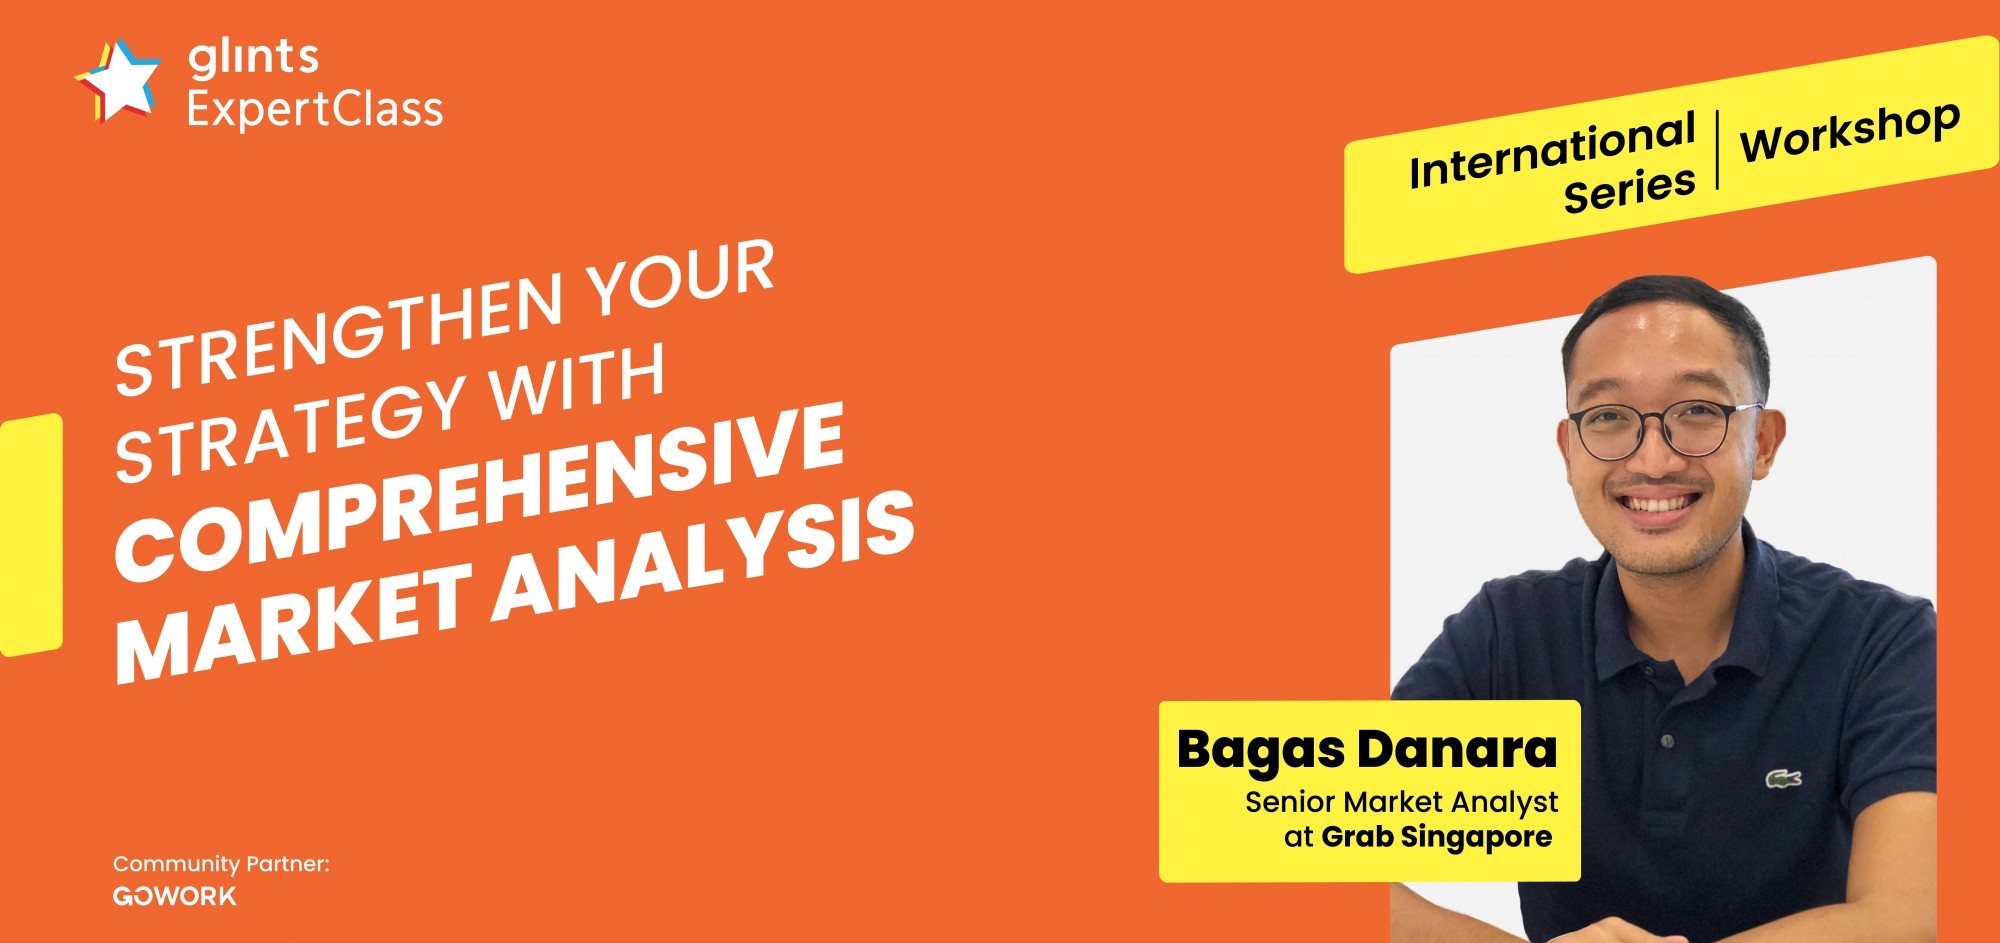 [Glints - GEC International Series] Strengthen Your Strategy with Comprehensive Market Analysis